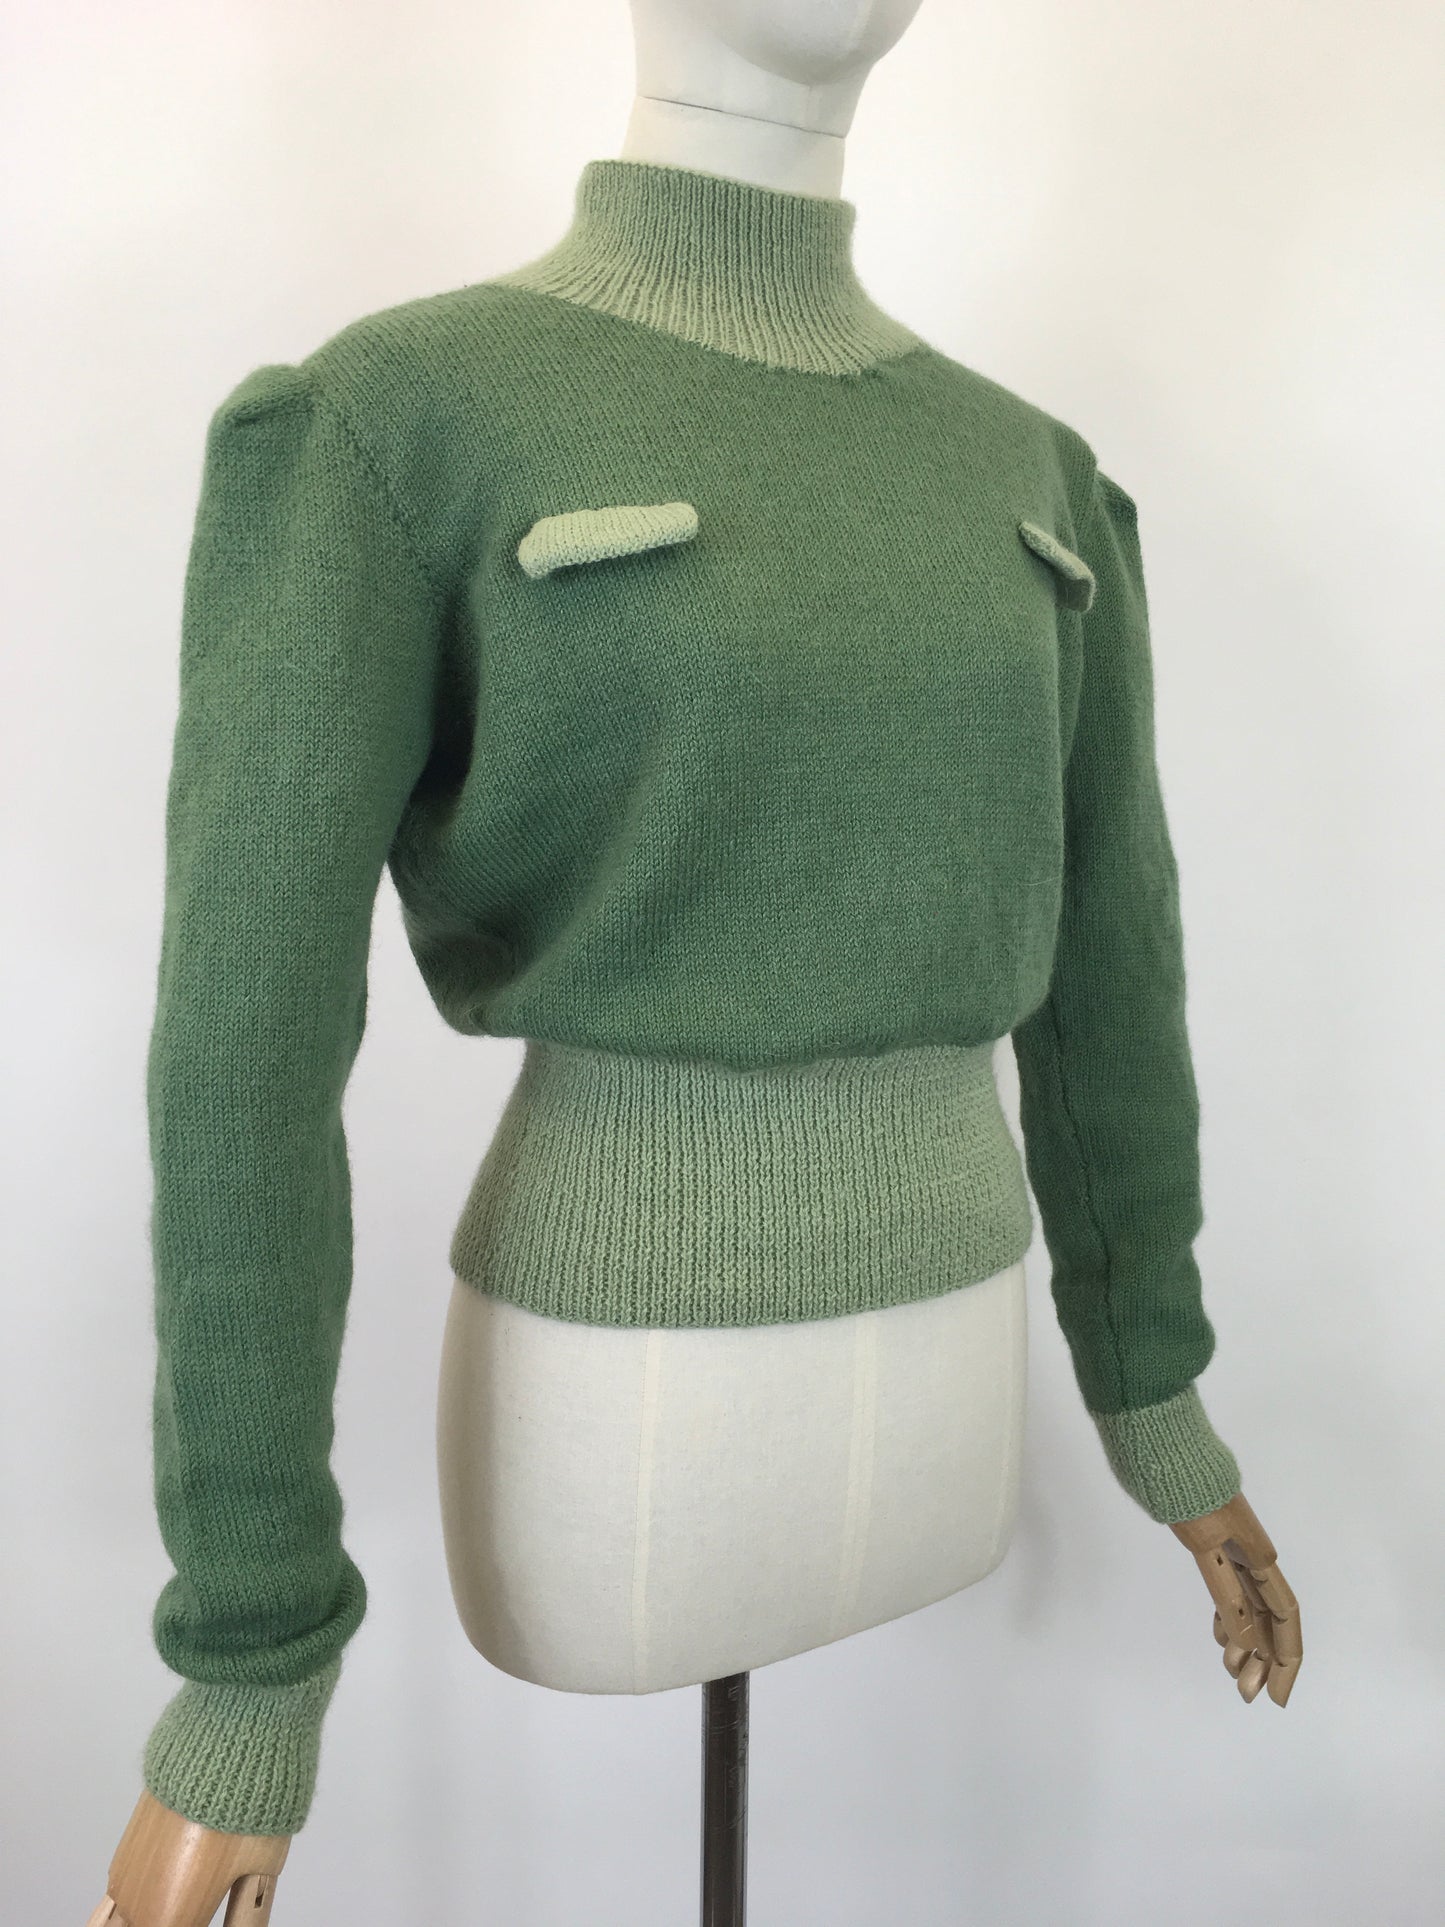 Recently Handknitted by ‘ Linda Boddison’ - Original 1940’s Reproduction Knitwear